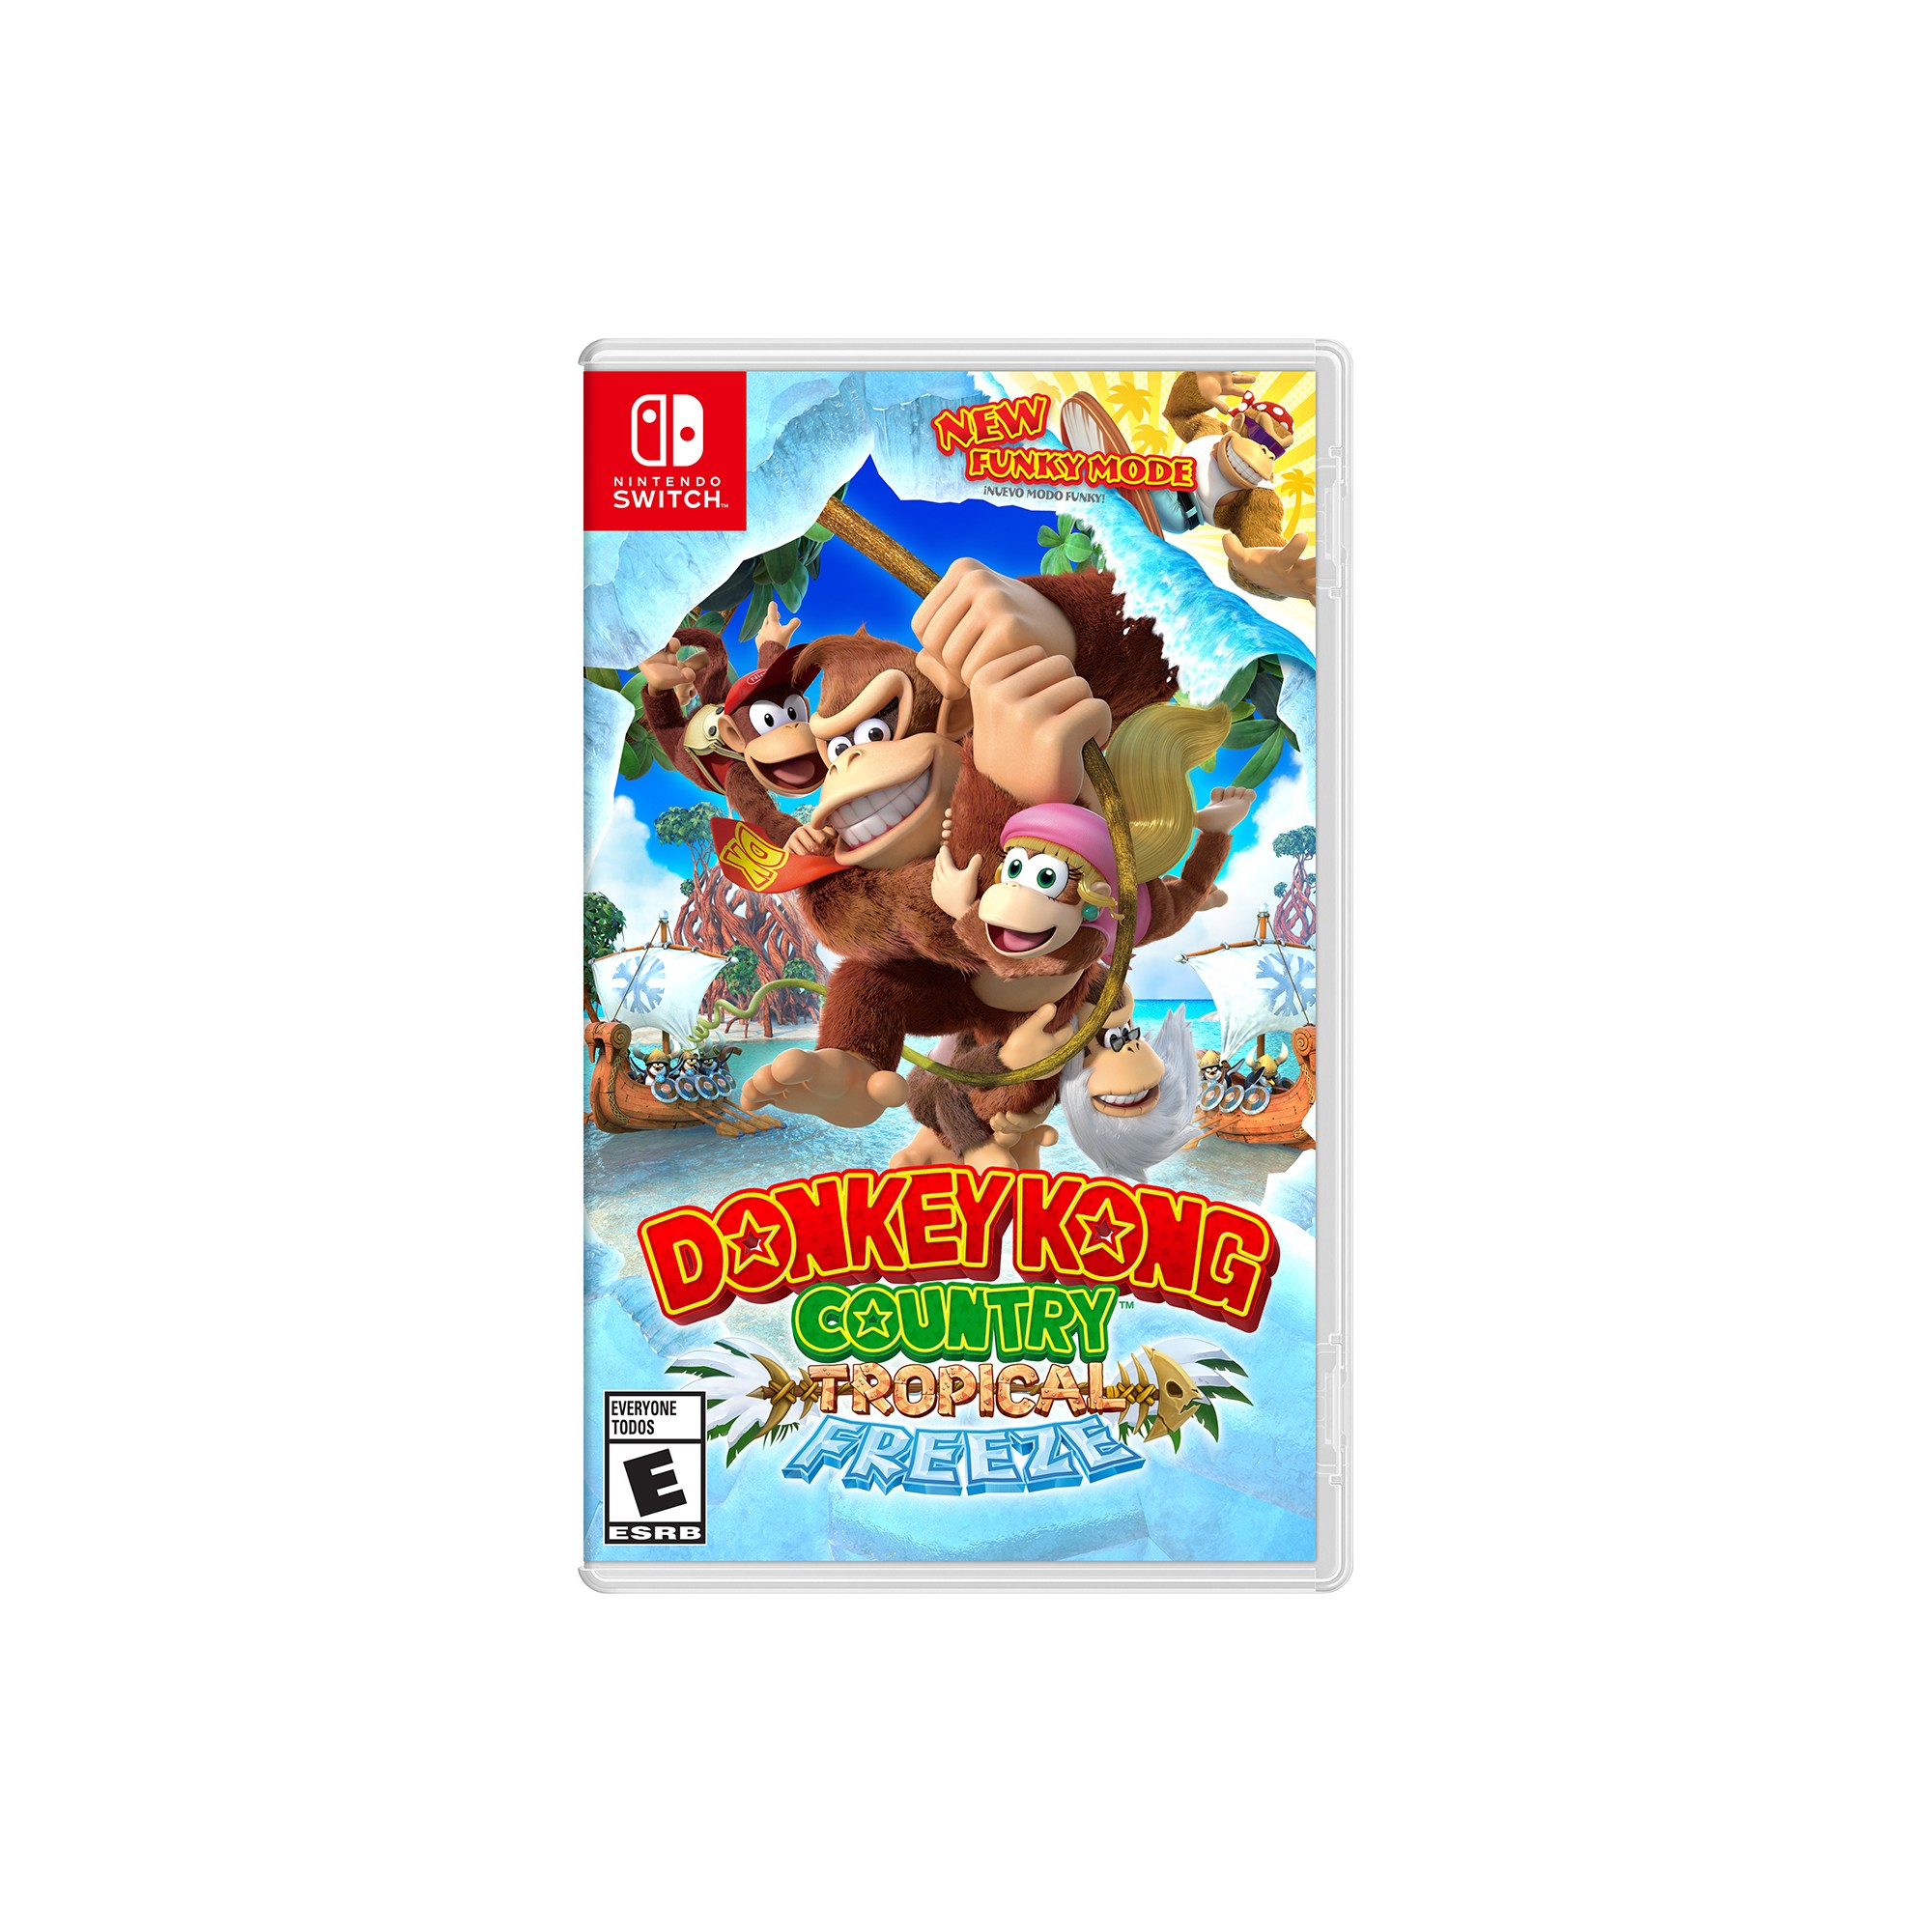 Donkey Kong Country: Tropical Freeze Donkey Kong Country Standard Edition Nintendo Switch Físico